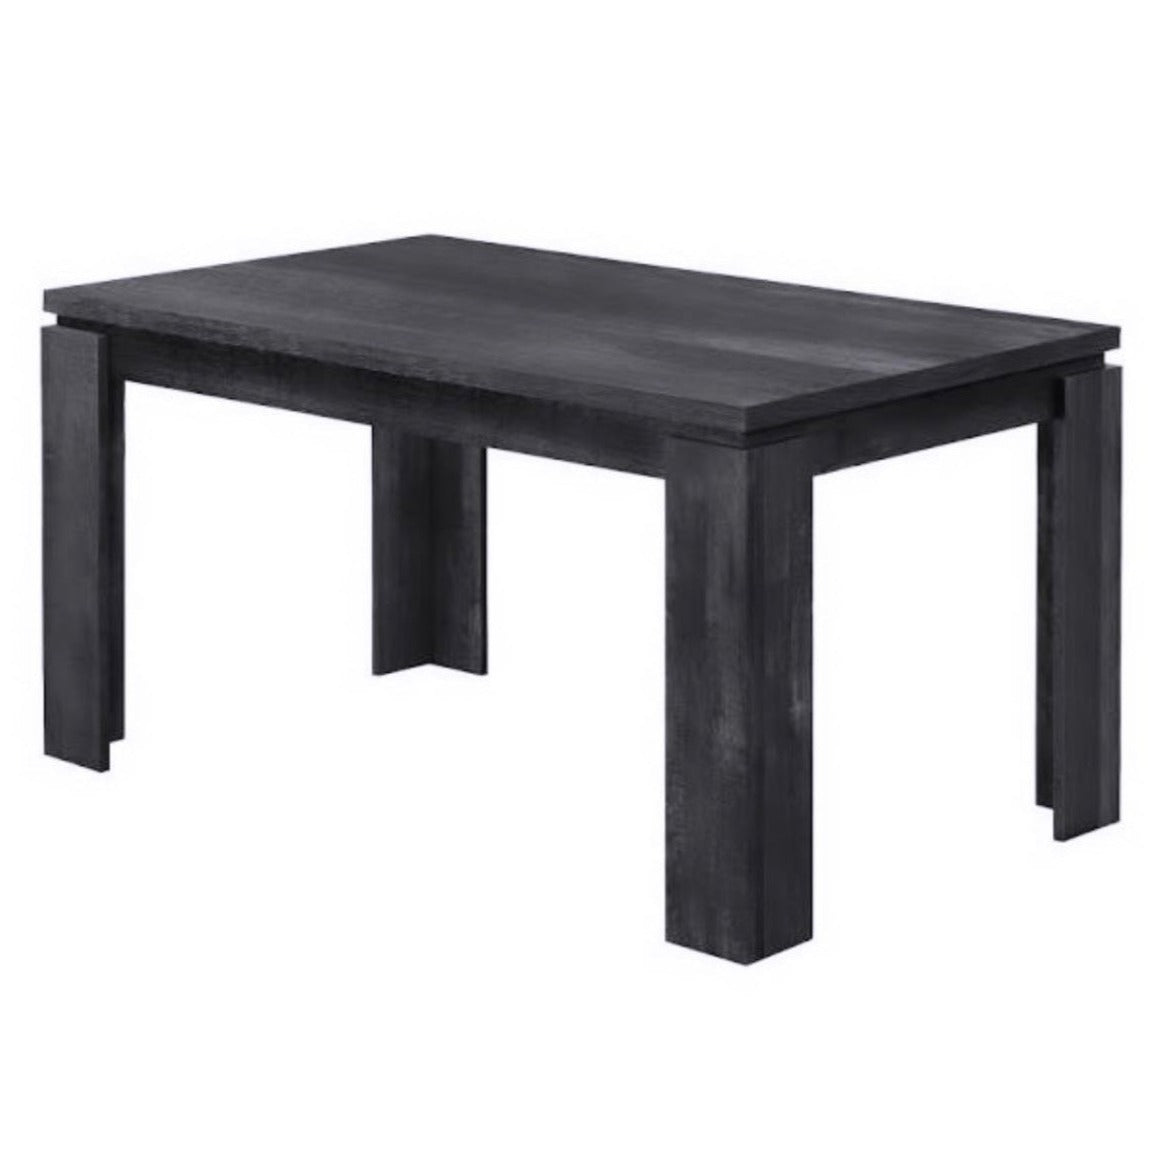 LEO WHITE DINING TABLE